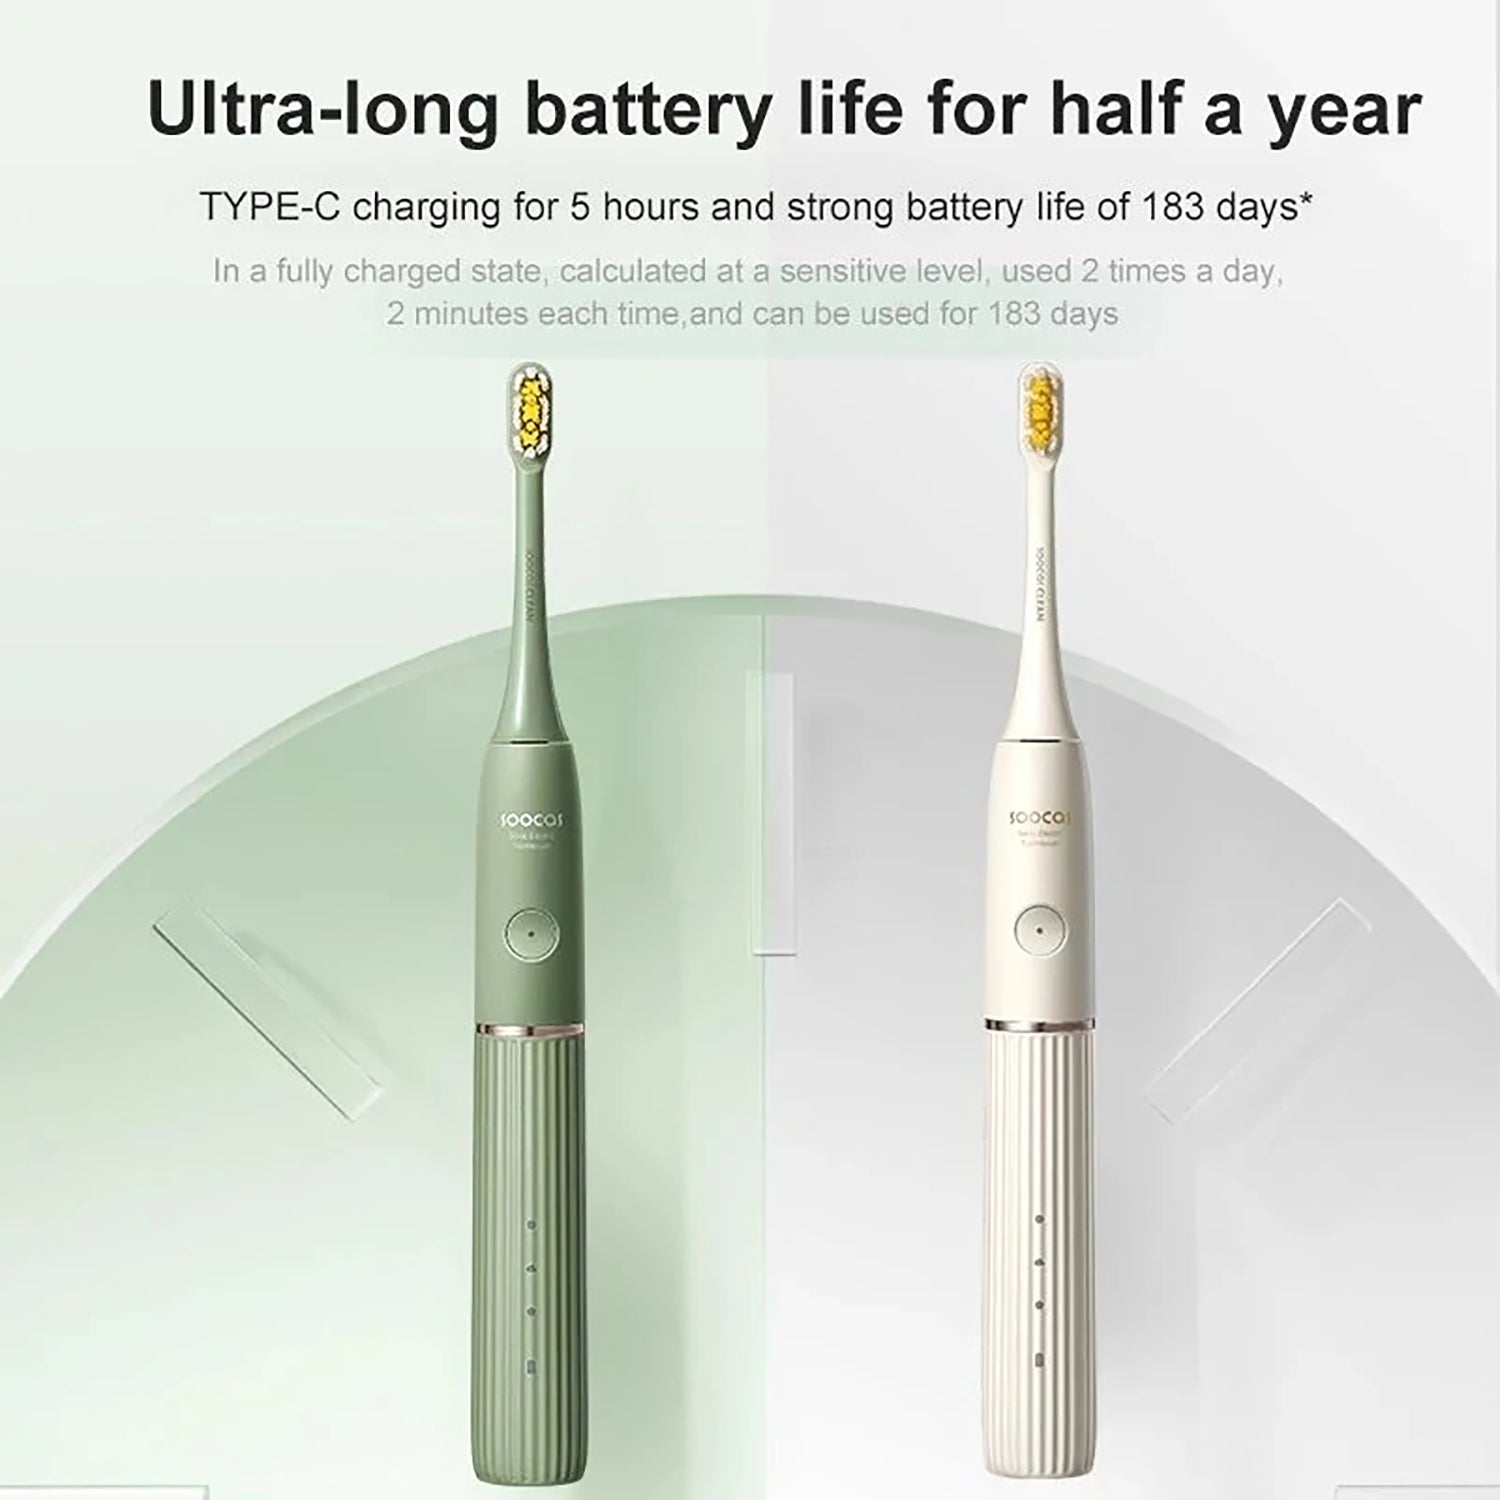 SOOCAS D2 Electric Toothbrush Sonic UVC Disinfect Toothbrush IPX7 Waterproof 3 Brushing Mode USB Rechargeable Electric Toothbrush Oral Care SOOCAS 